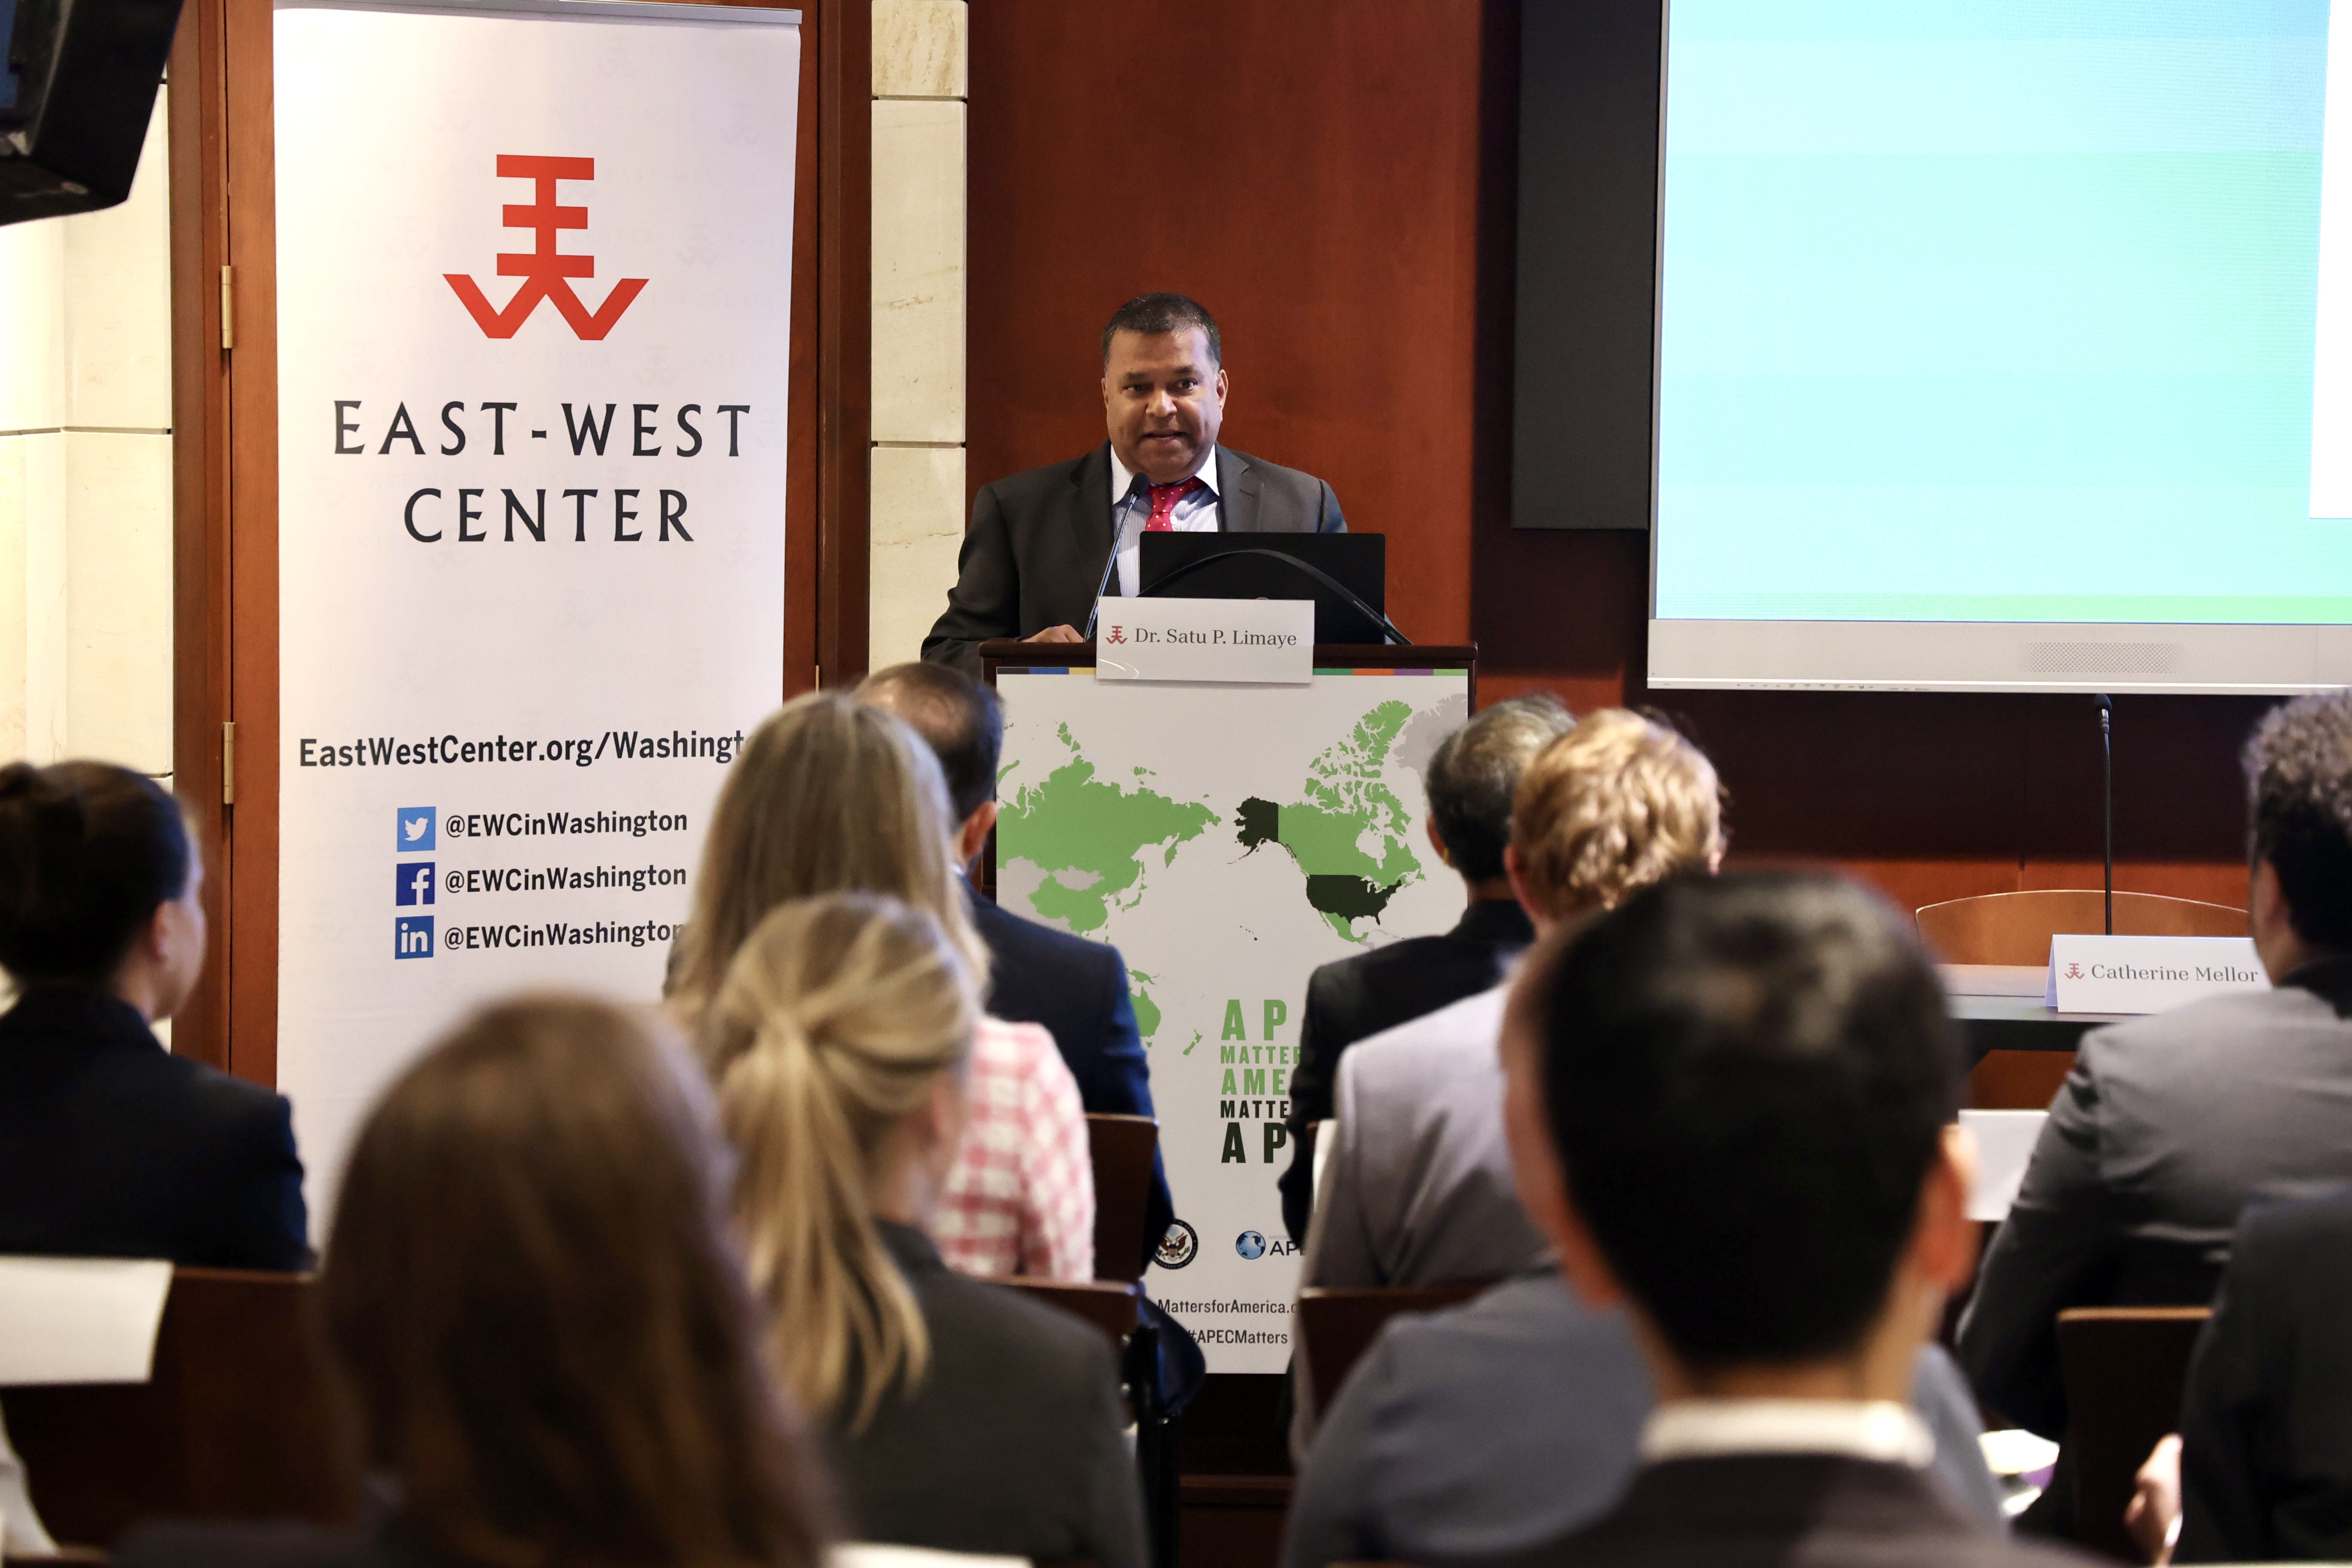 A man in a suit (Dr. Satu Limaye) speaks in front of an audience at a podium beside an East-West Center banner.